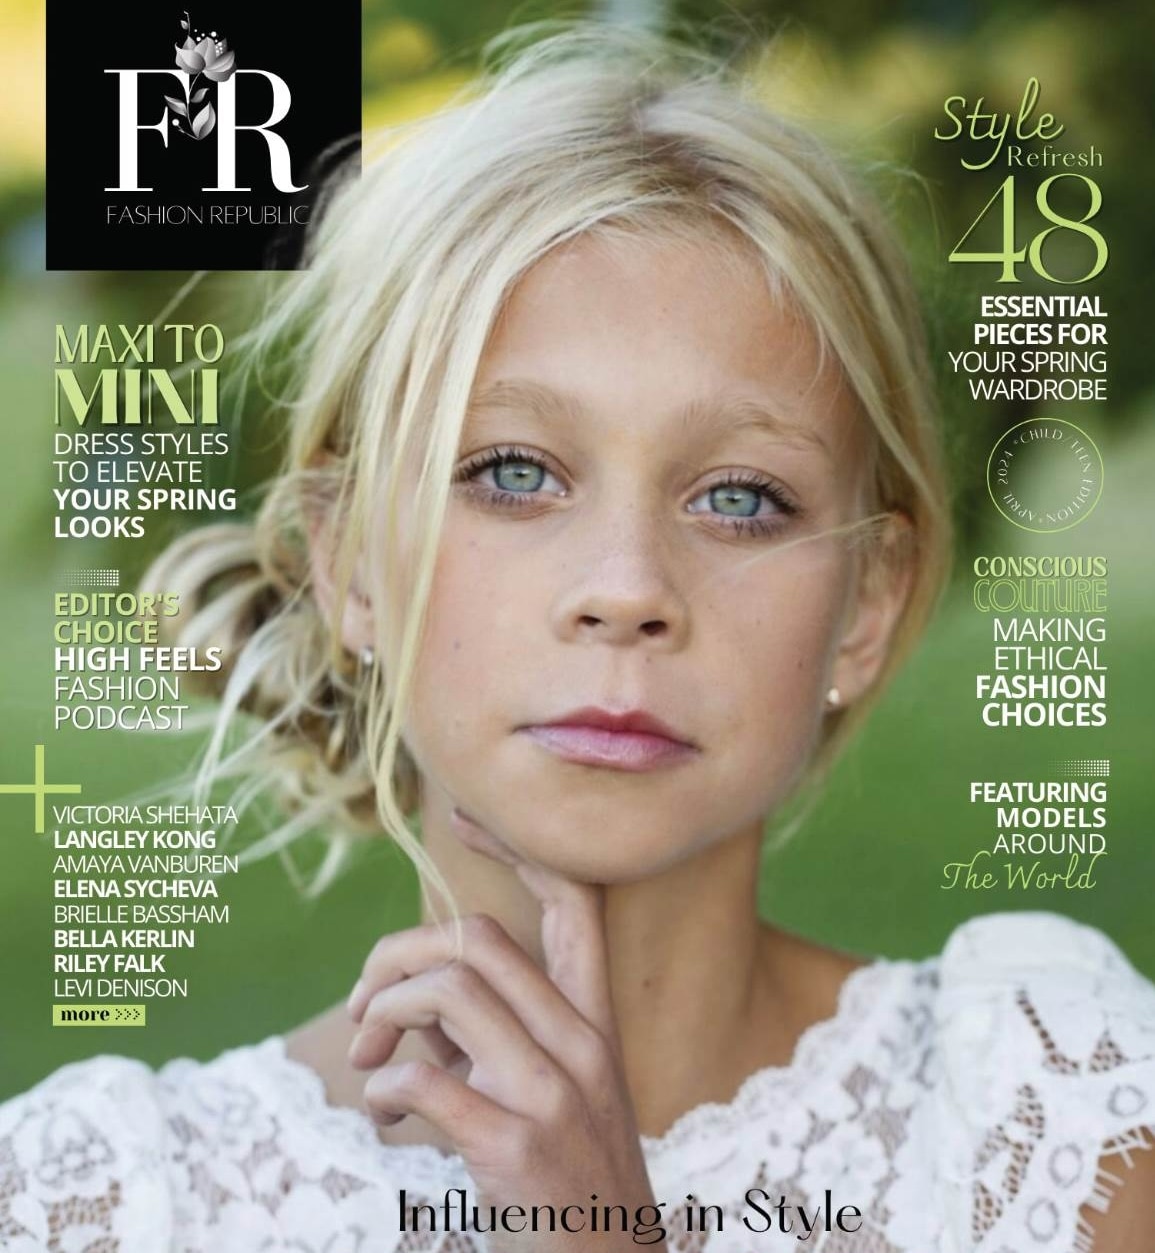 A fashion magazine cover that says child/teen edition.